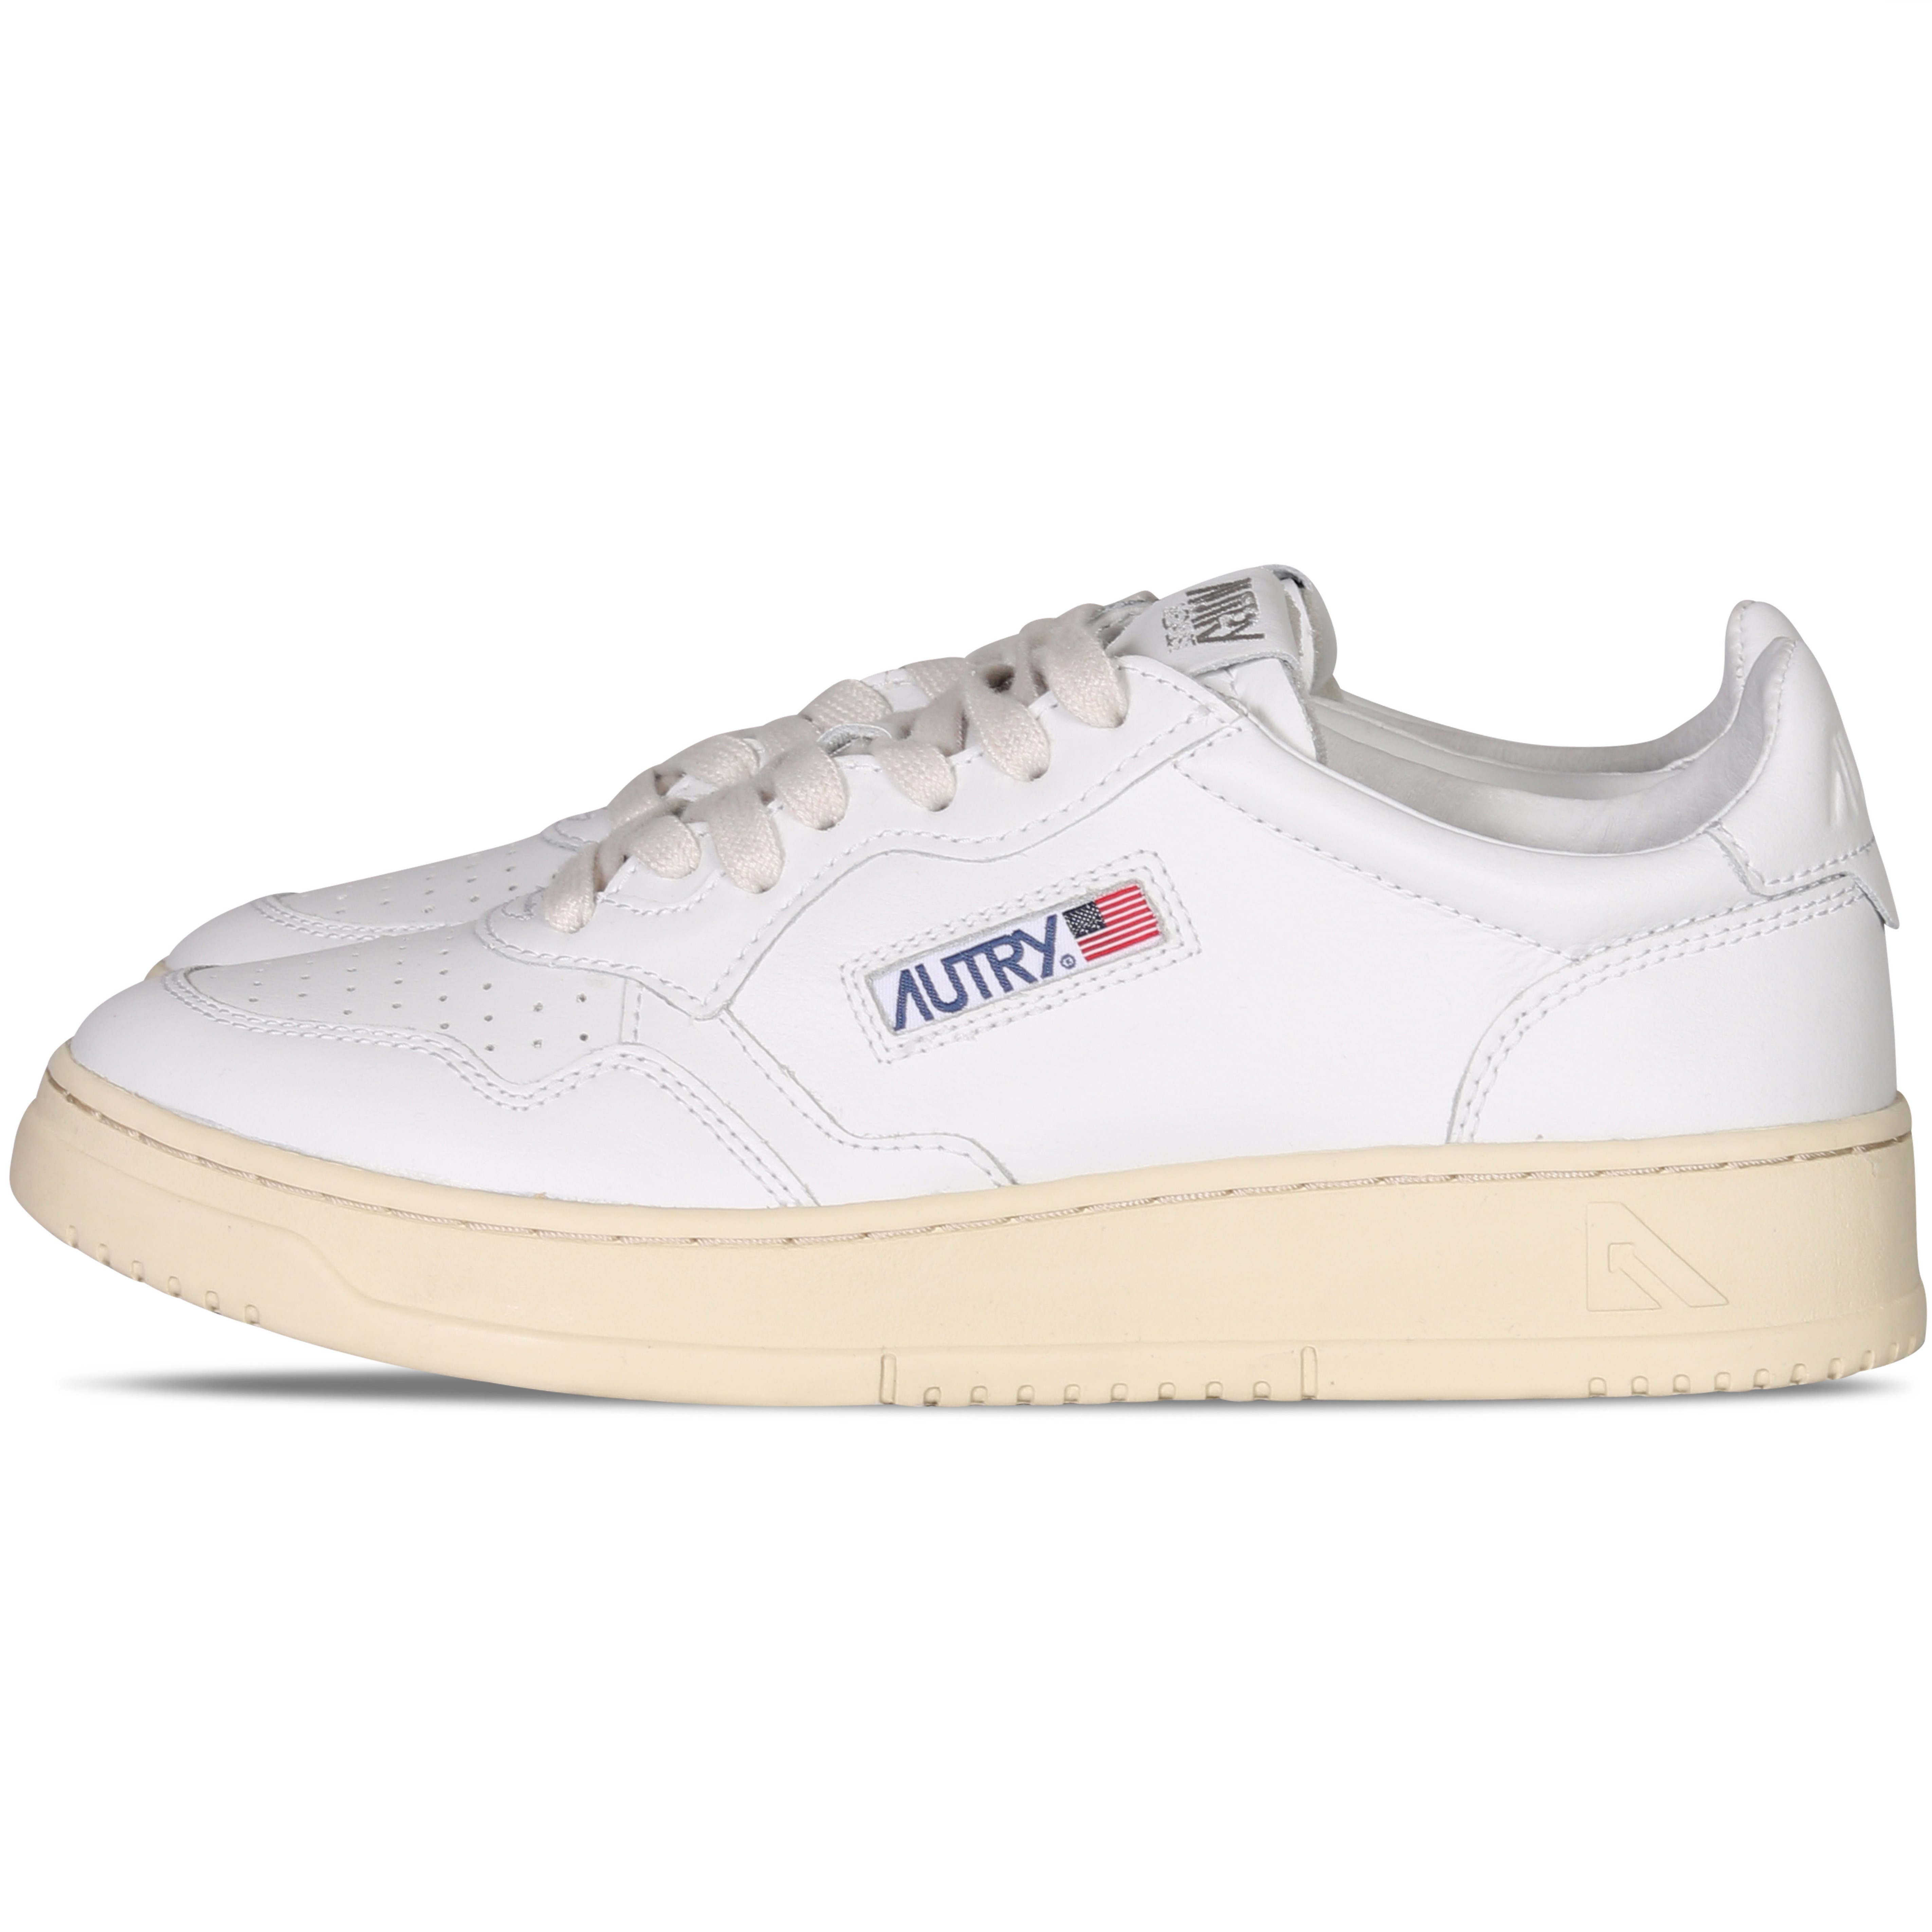 Autry Action Shoes Low Sneaker White/White